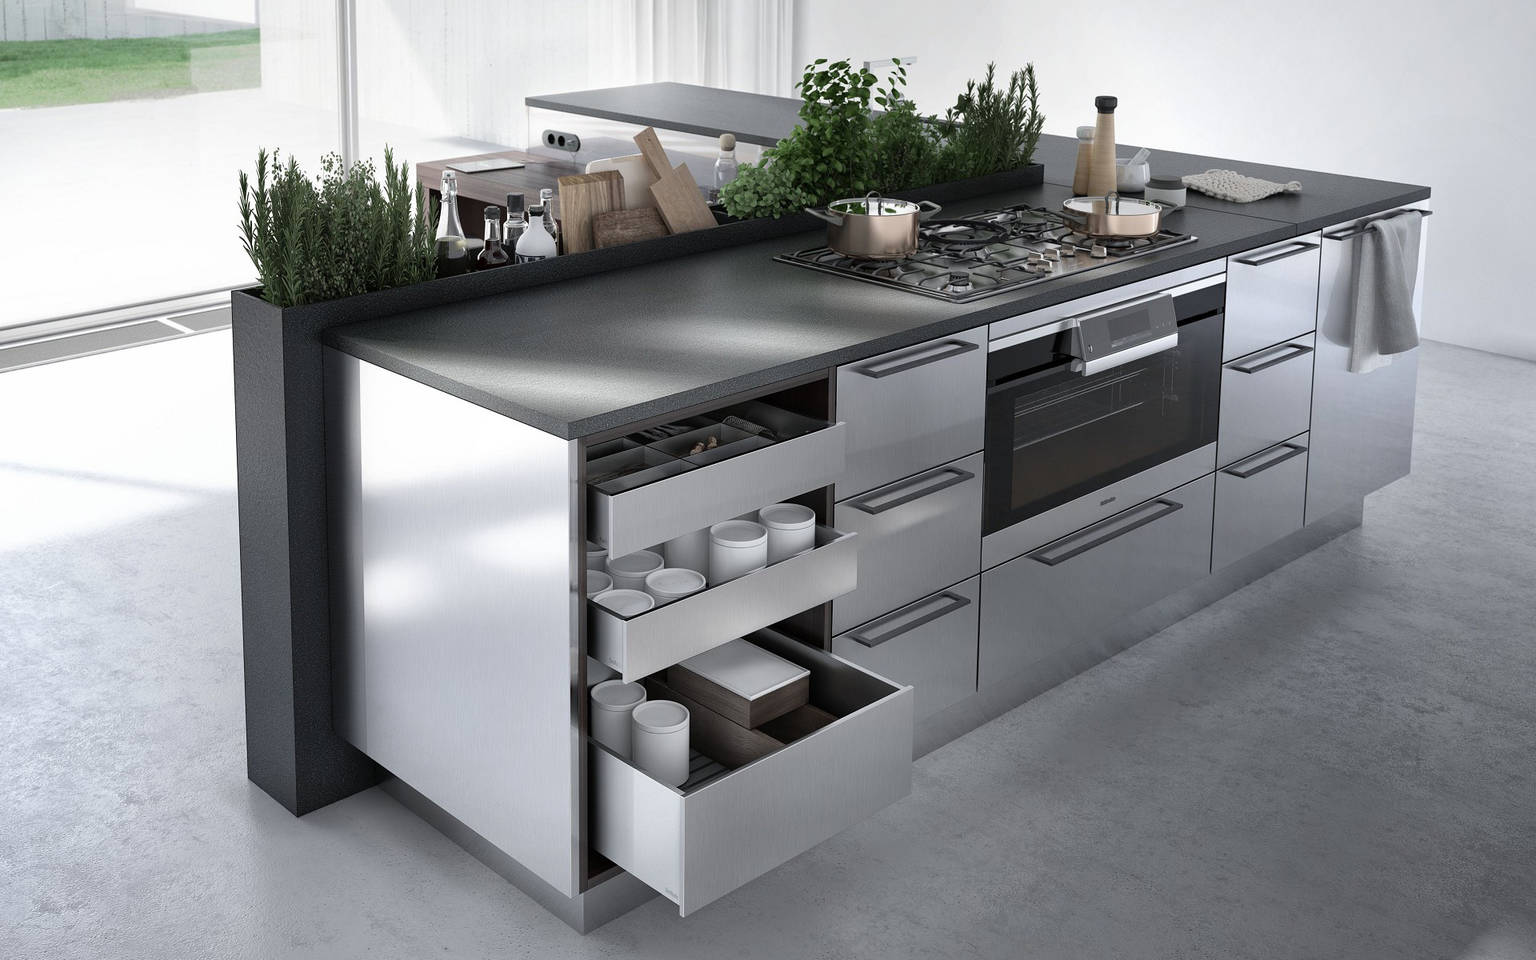 SieMatic Urban SE kitchen island in L shape with open drawers, herb garden and breakfast bar